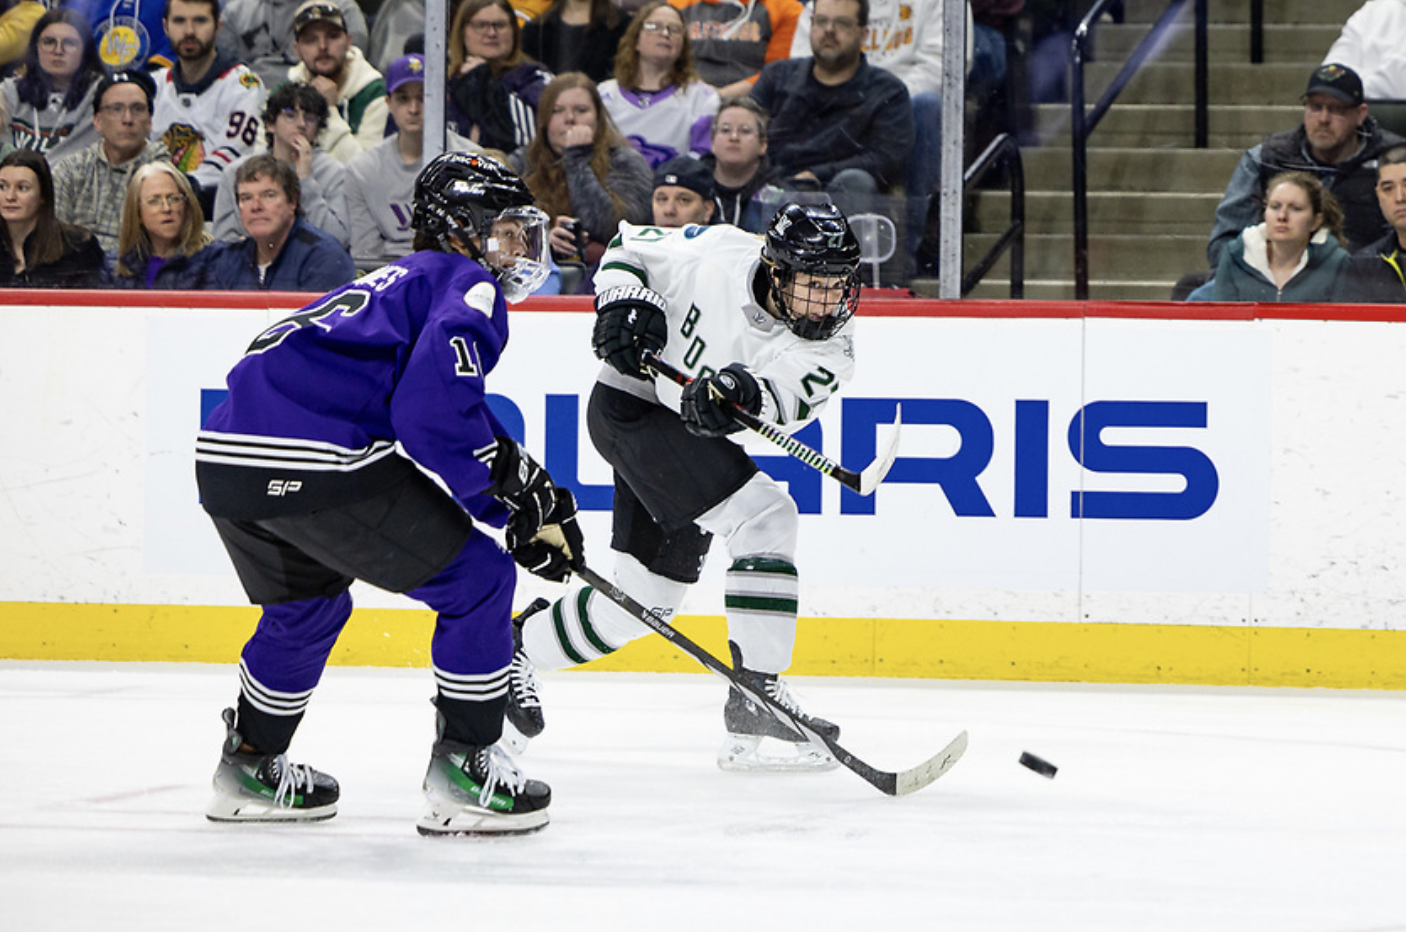 Darkangelo follows through on her shot on goal as Jaques tries to defend. Jaques is turning to skate forward while Darkangelo is mid-stride. Darkangelo is in white, while Jaques is in purple. 